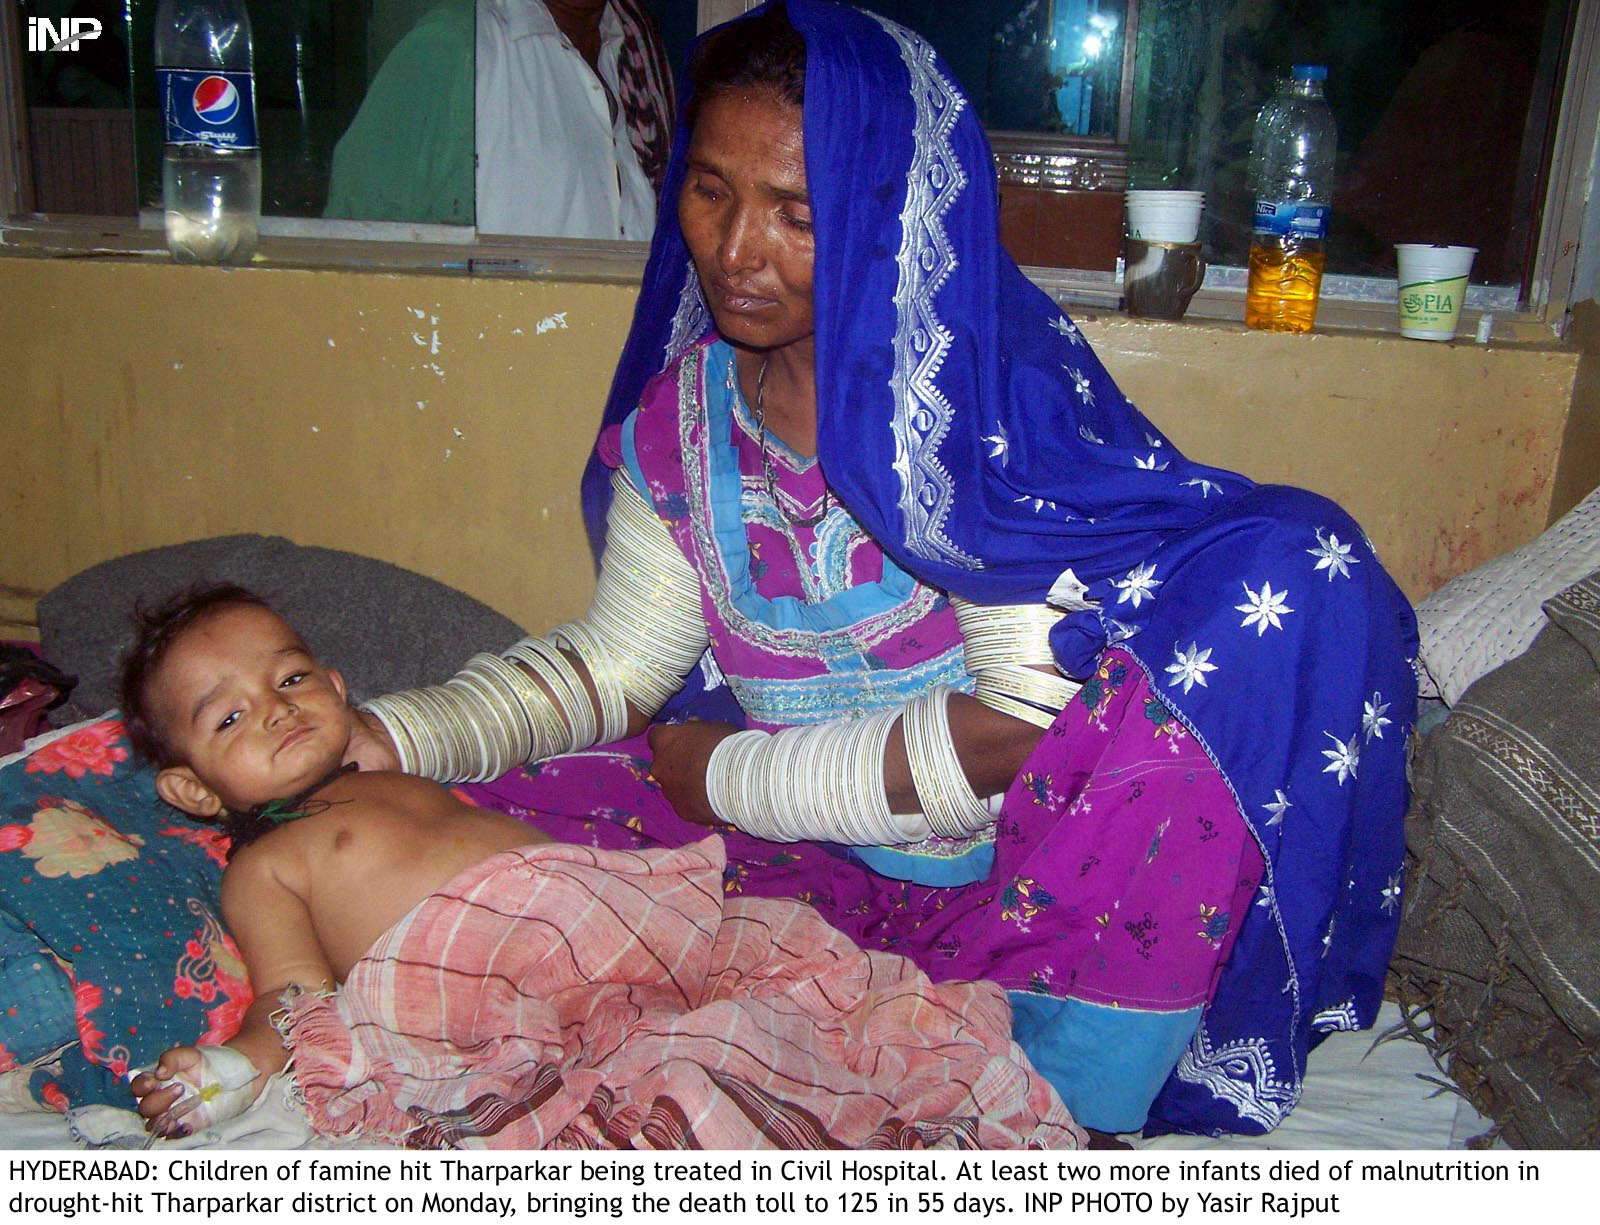 a thari woman tends to her sick child at the civil hospital in hyderabad photo inp